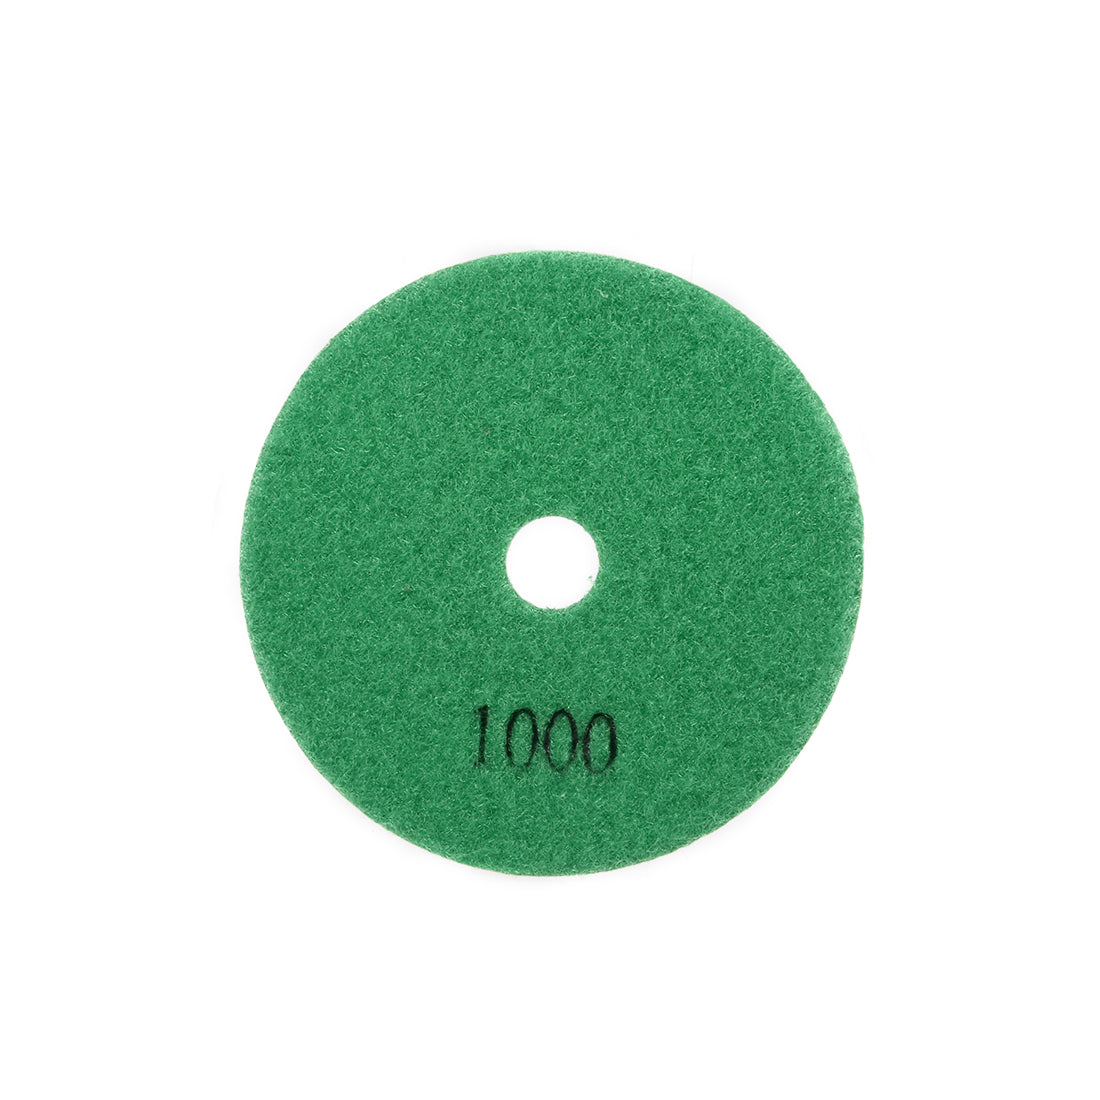 uxcell Uxcell Diamond Polishing Sanding Grinding Pads Discs 4 Inch Grit 1000 1 Pcs for granito Concrete Stone Marble